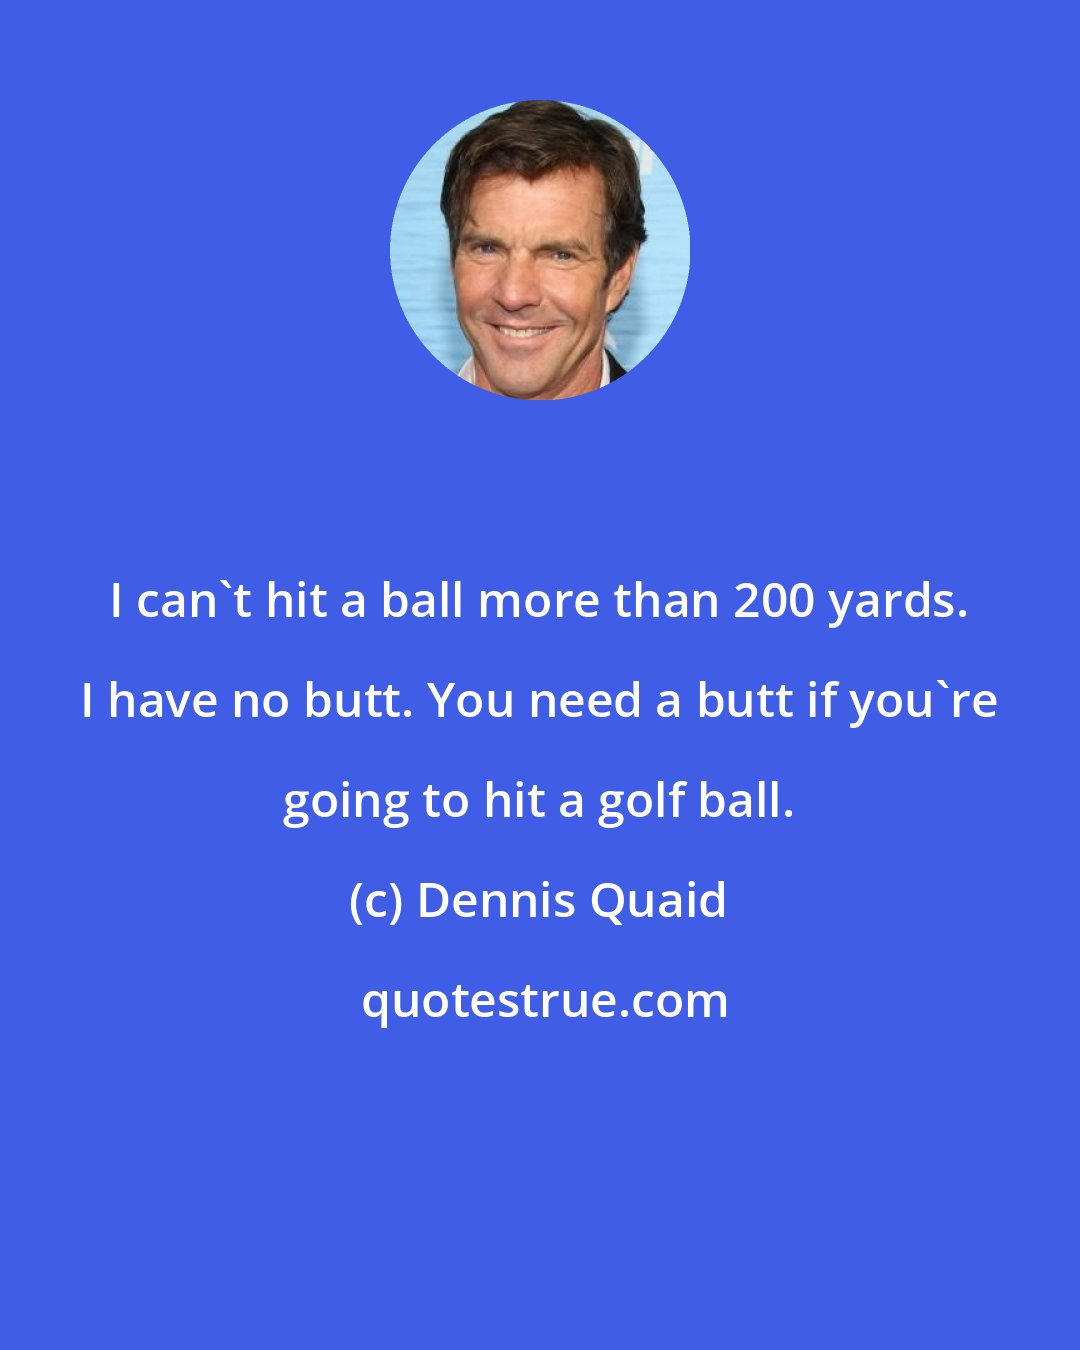 Dennis Quaid: I can't hit a ball more than 200 yards. I have no butt. You need a butt if you're going to hit a golf ball.